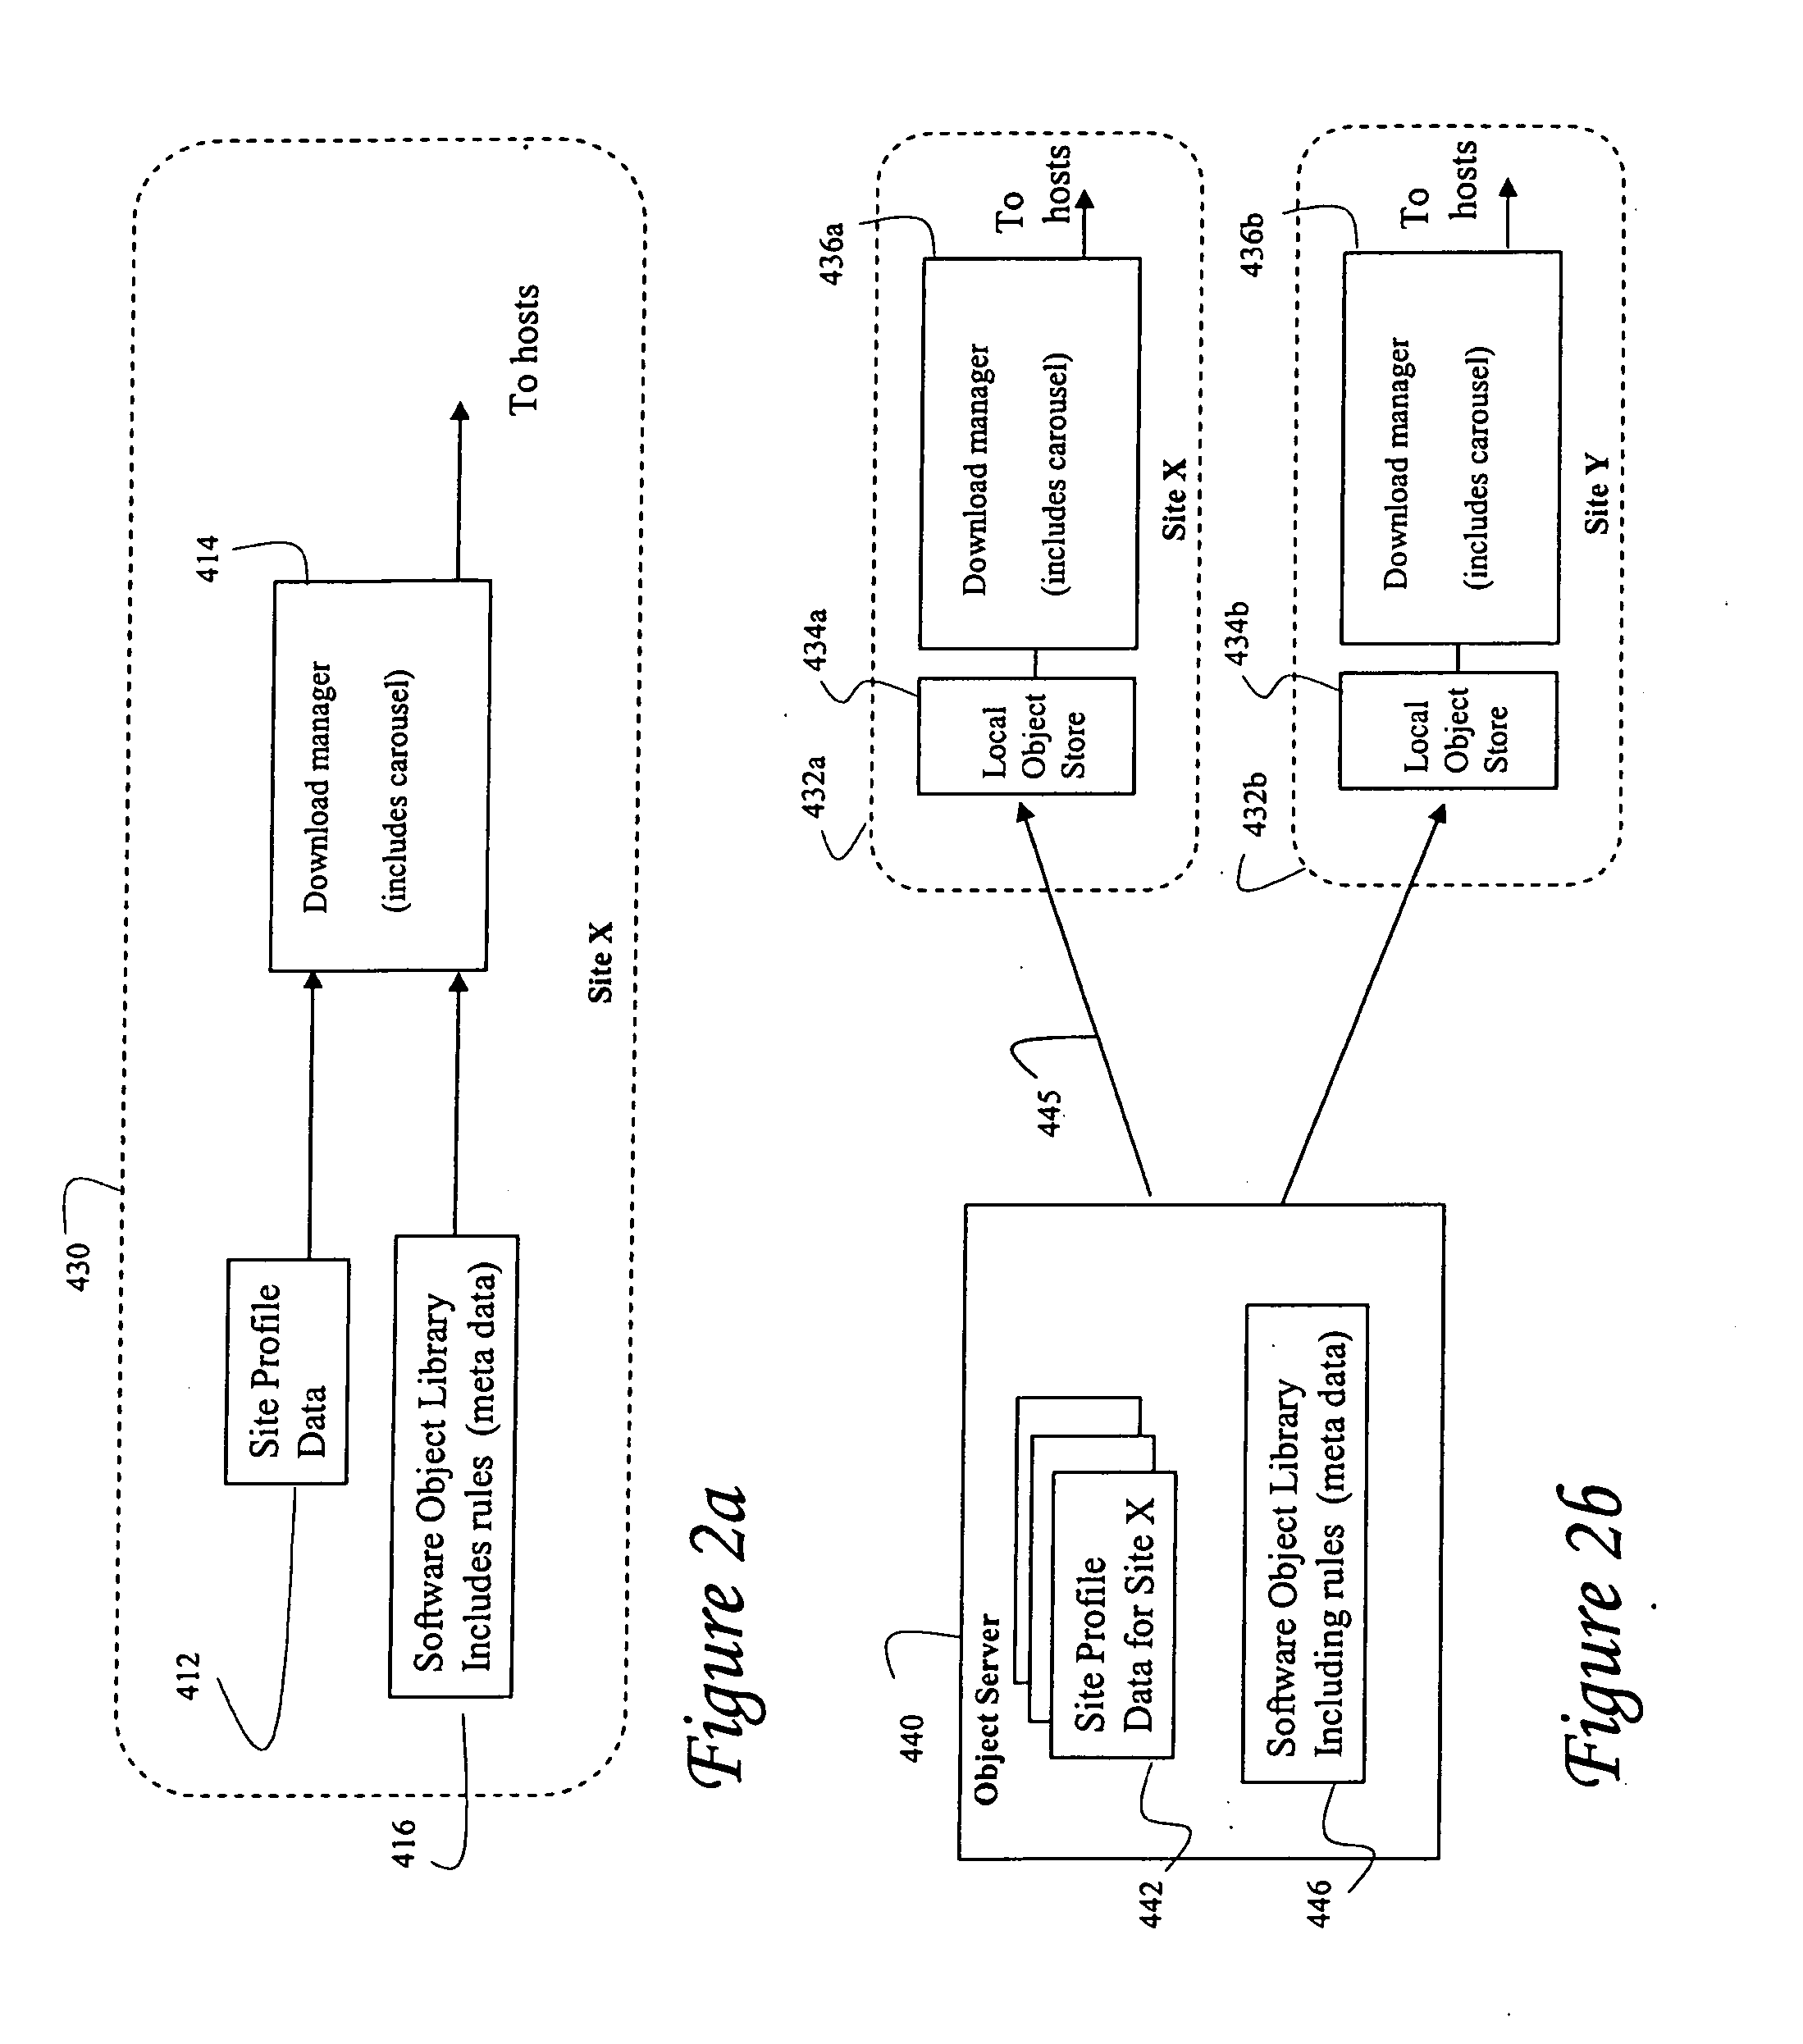 Systems and methods for distributing software to a host device in a cable system